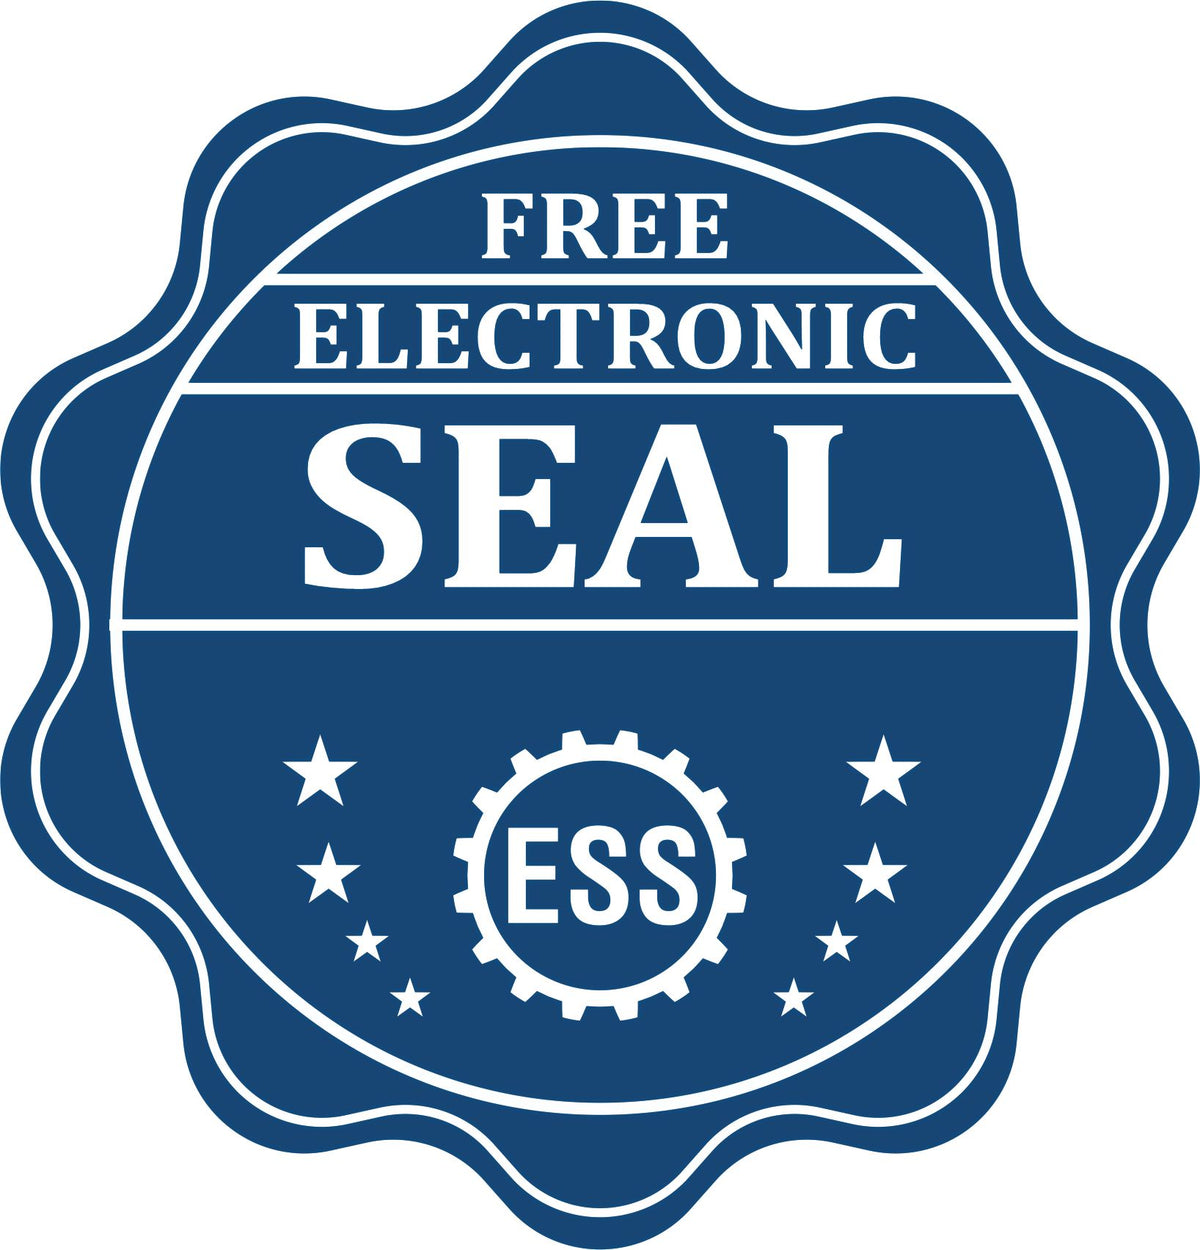 A badge showing a free electronic seal for the State of Washington Extended Long Reach Engineer Seal with stars and the ESS gear on the emblem.